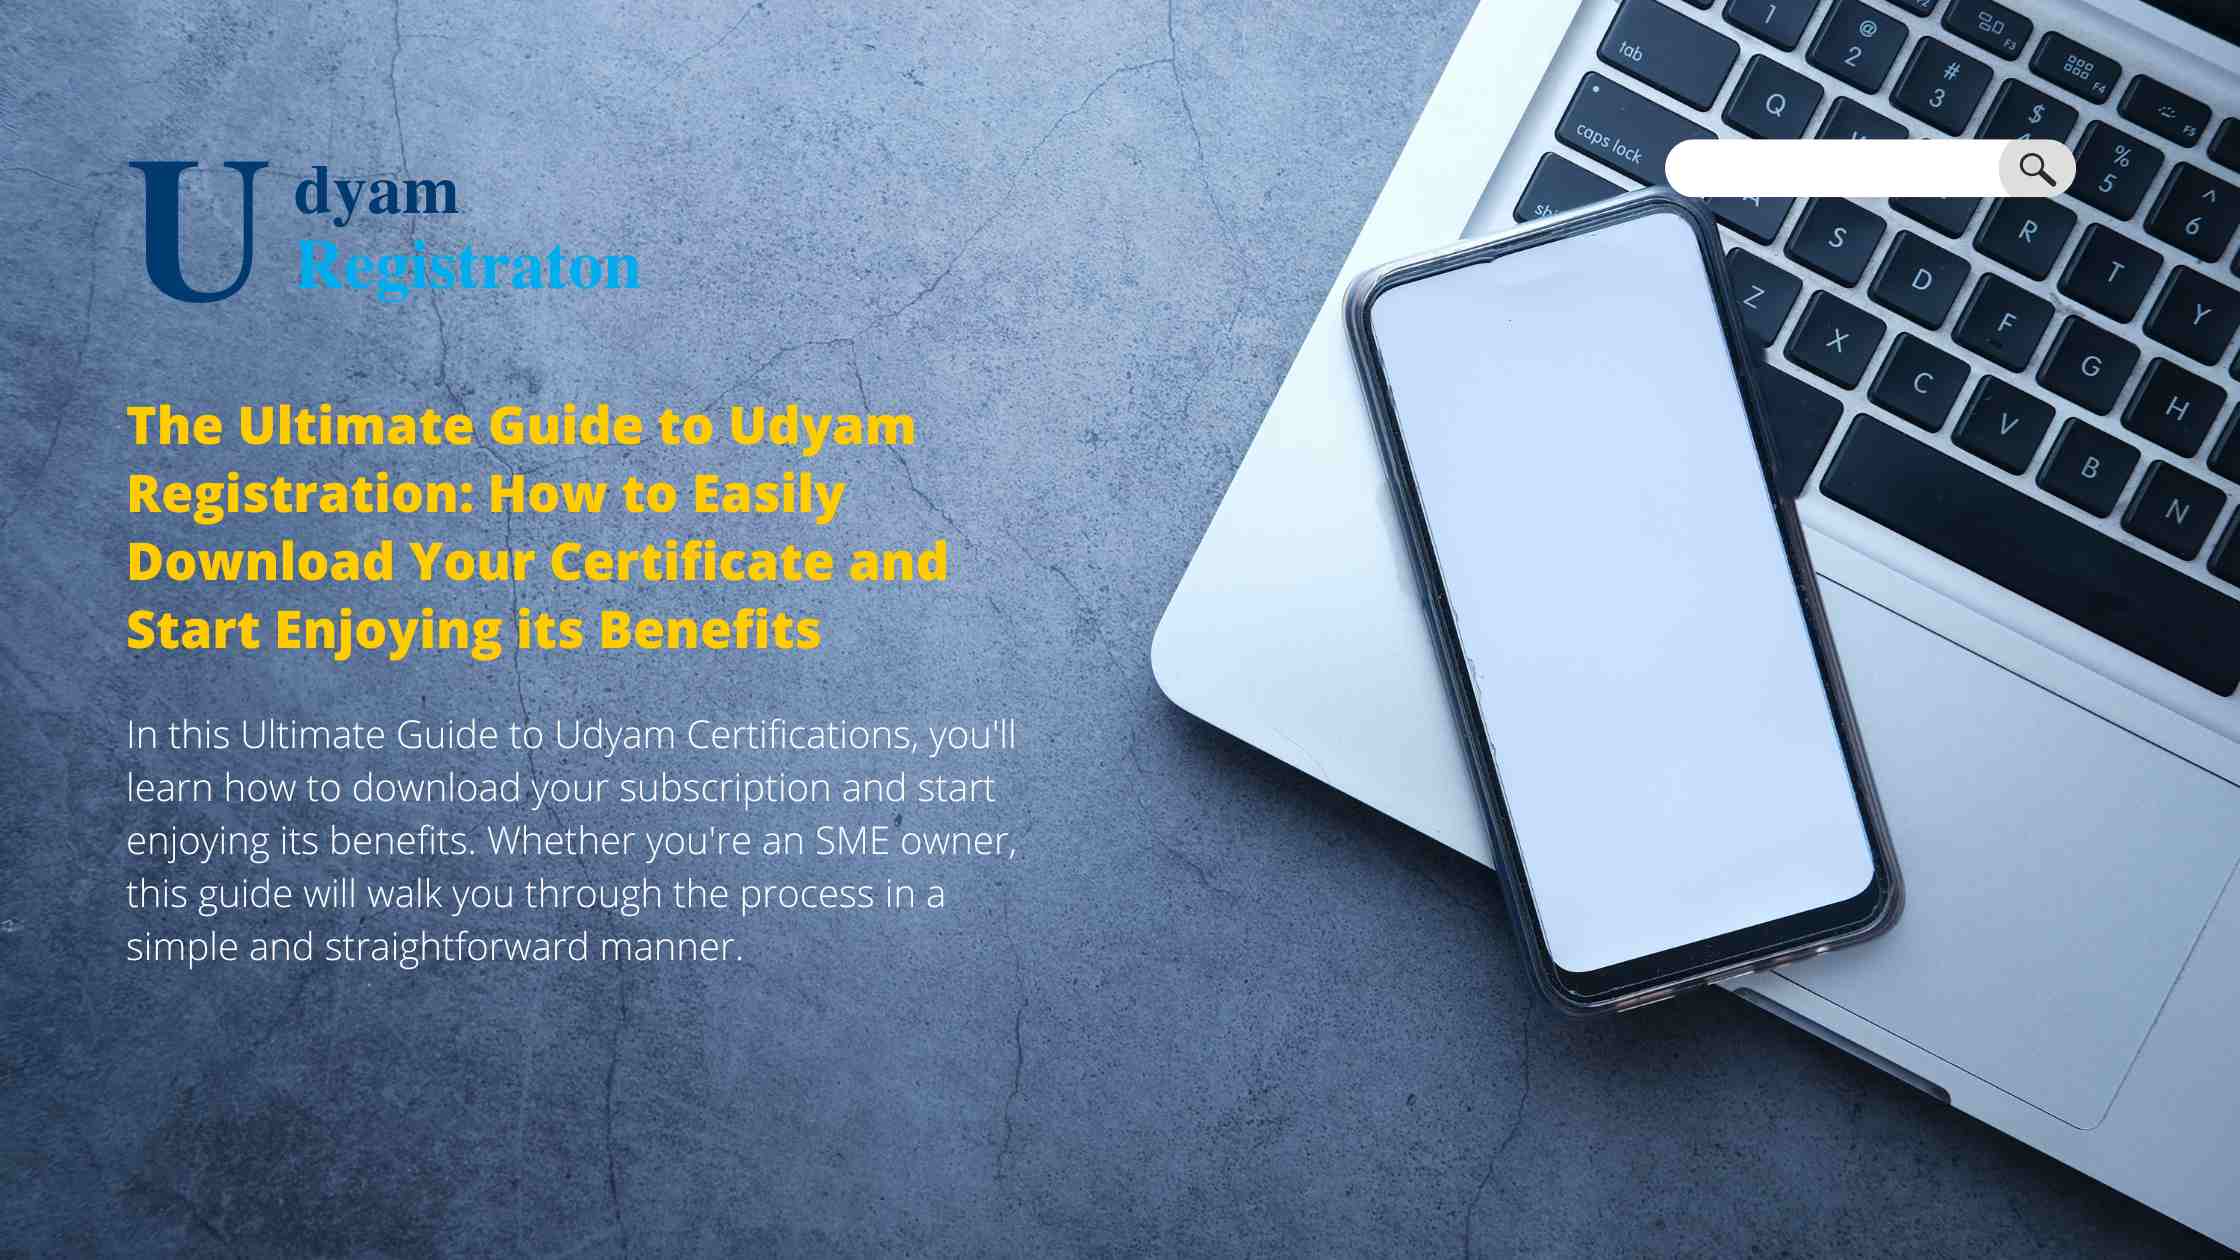 The Ultimate Guide to Udyam Registration: How to Easily Download Certificate and Enjoying its Benefits